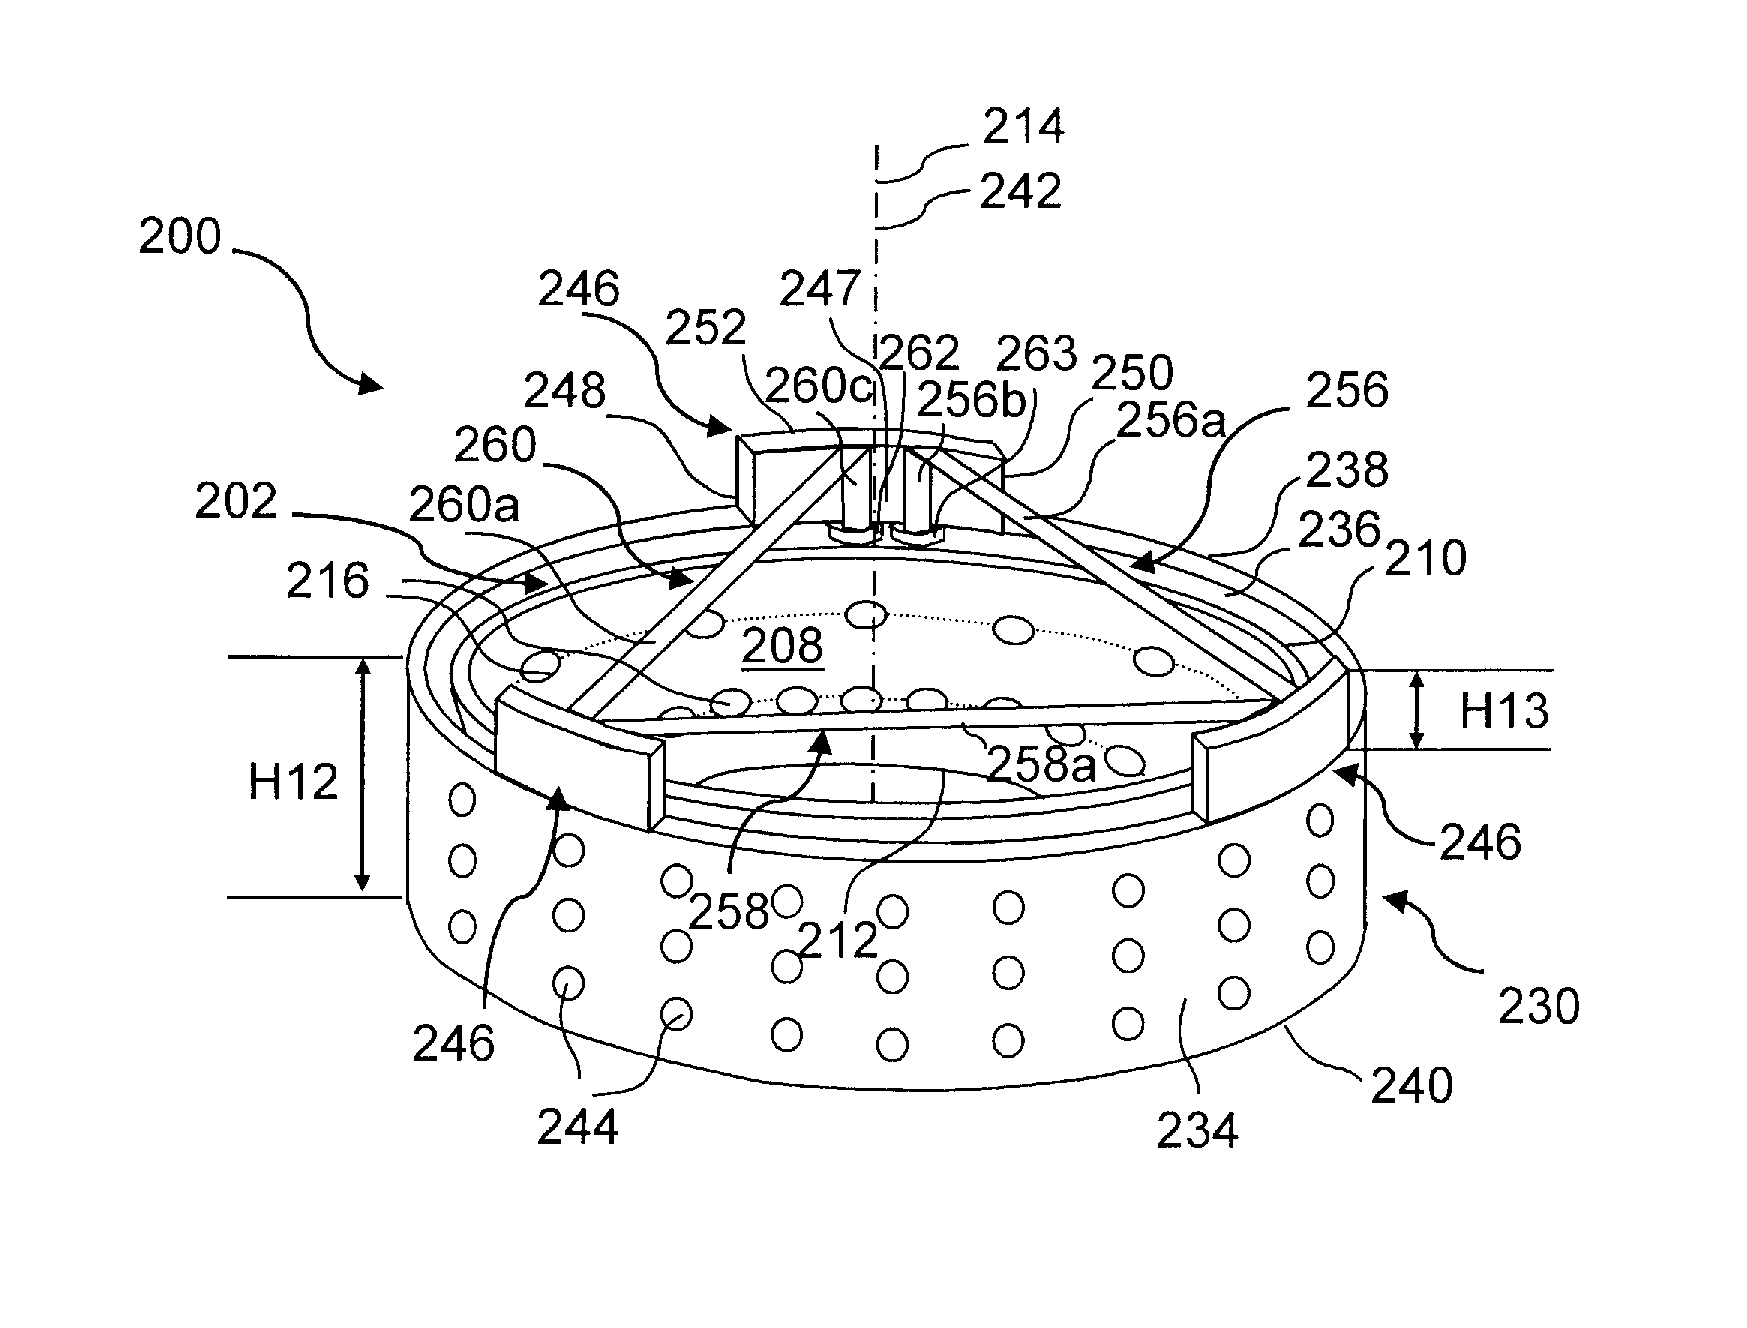 Removable Apparatus To Regulate Flame Heat Transfer And Retain Dripping Liquid Substance For A Gas Stove Burner